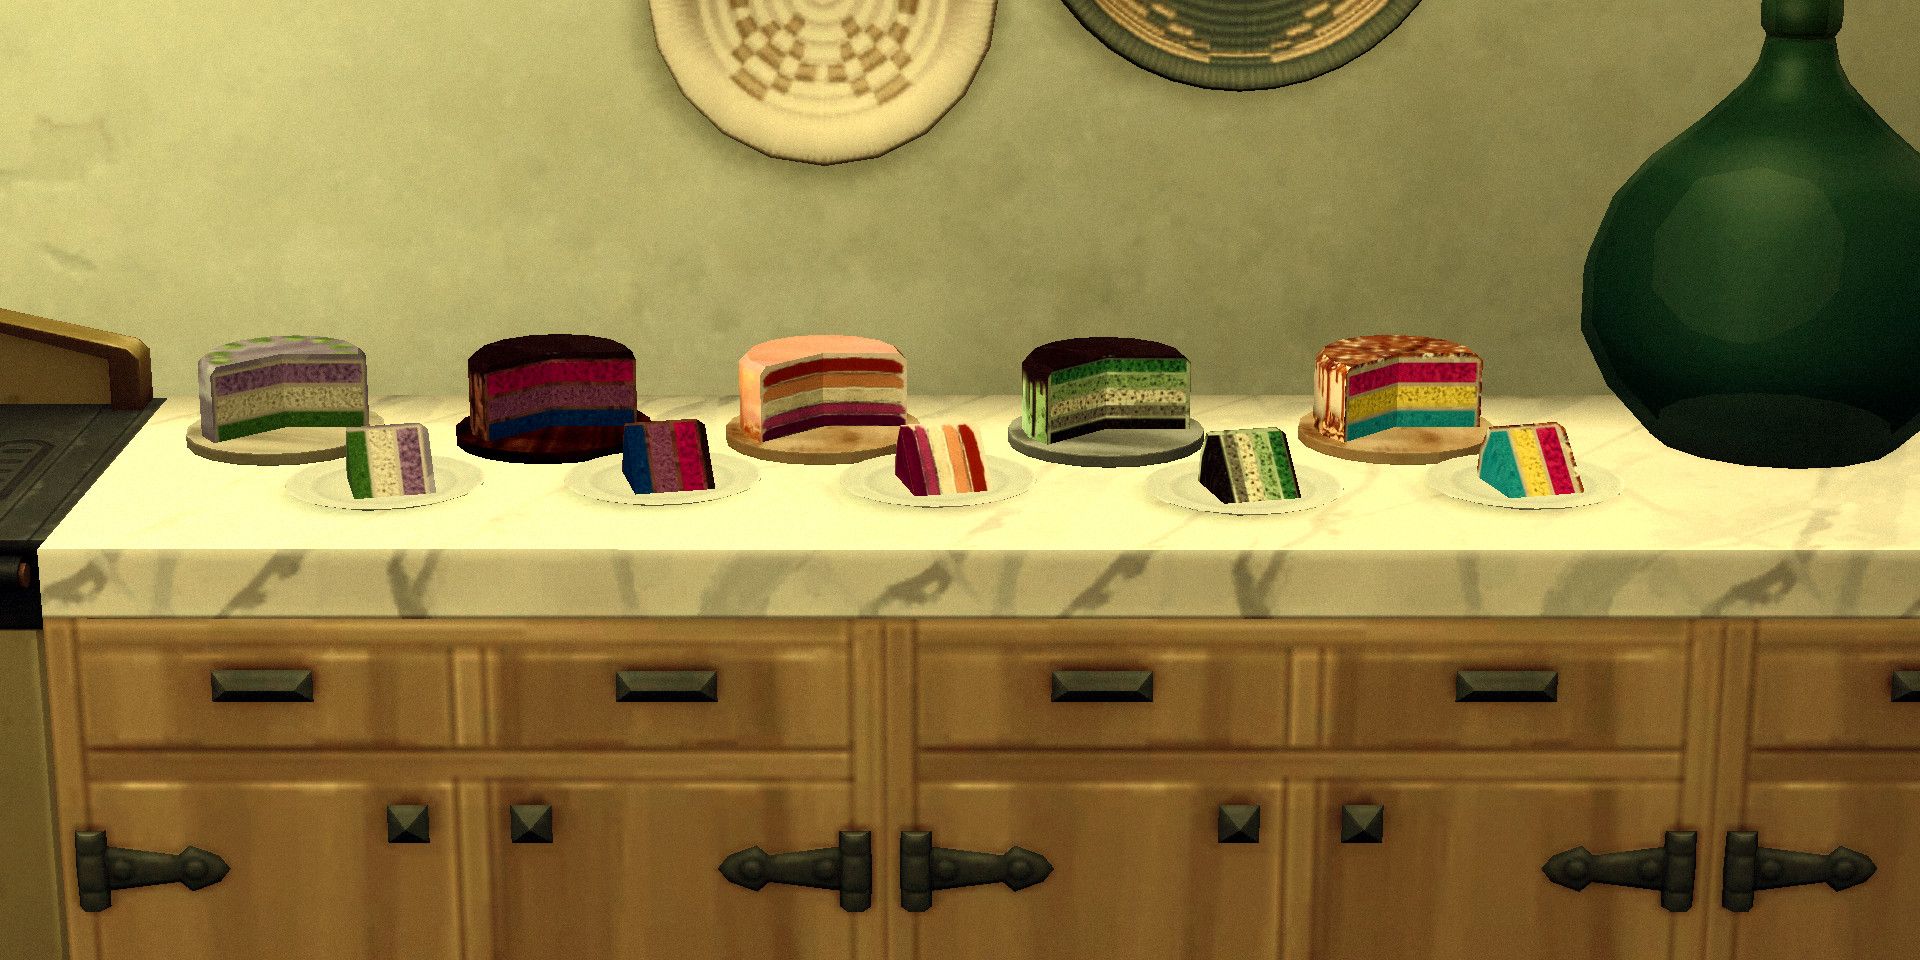 Five different cakes sitting on a counter in The Sims 4, each with a slice cut out. Cross section of each cake reveals the color scheme of a different pride LGBTQ pride flag inside.